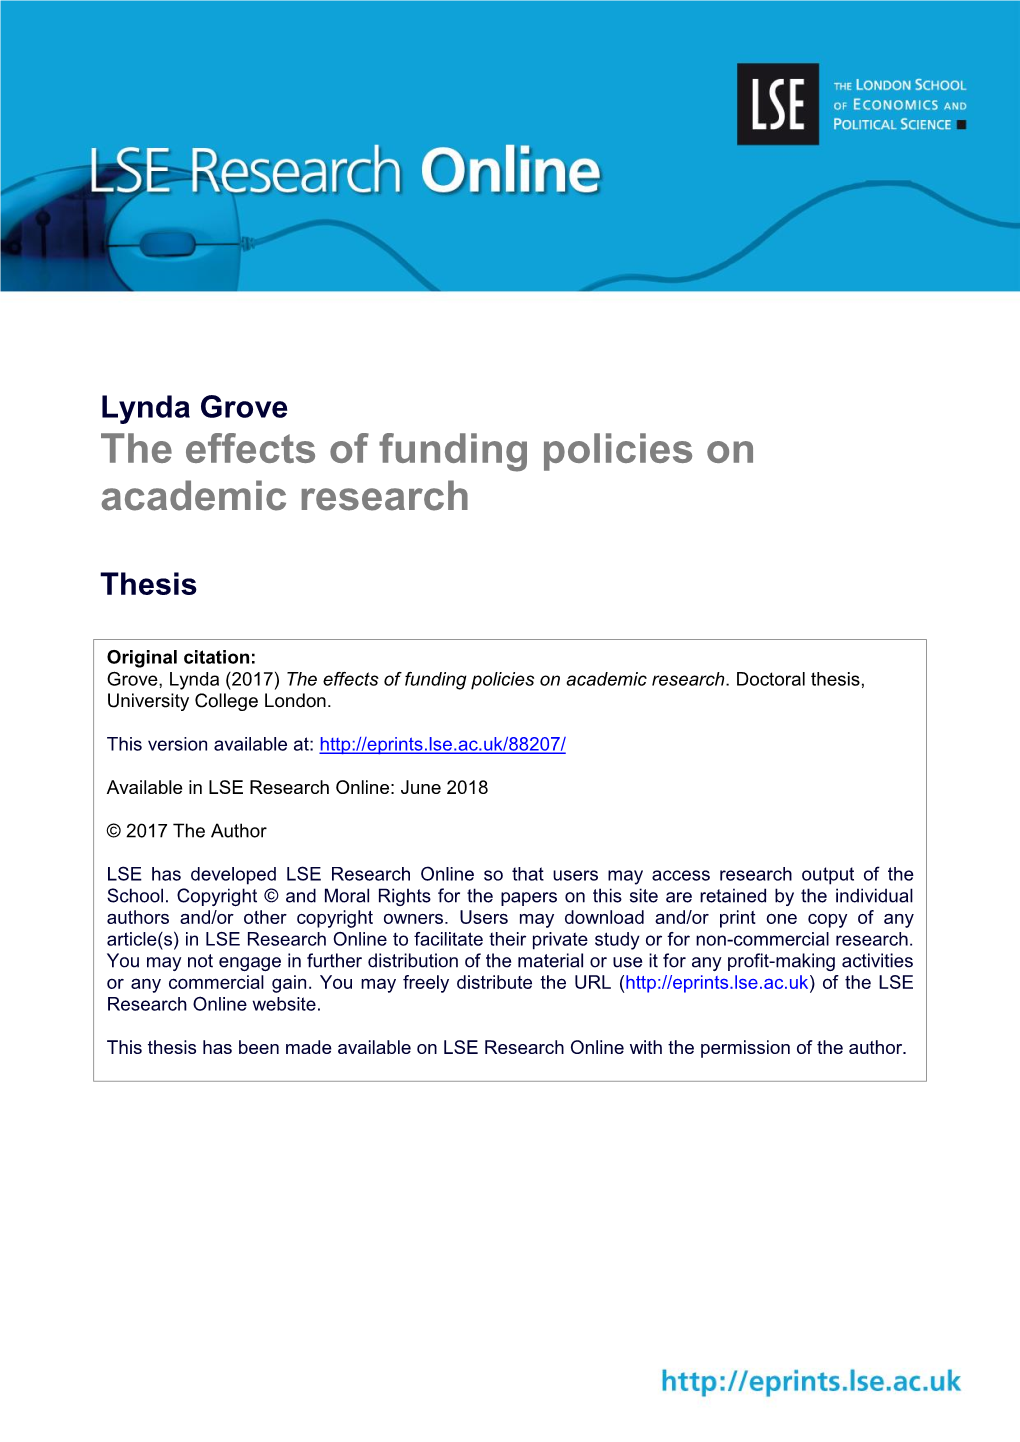 The Effects of Funding Policies on Academic Research